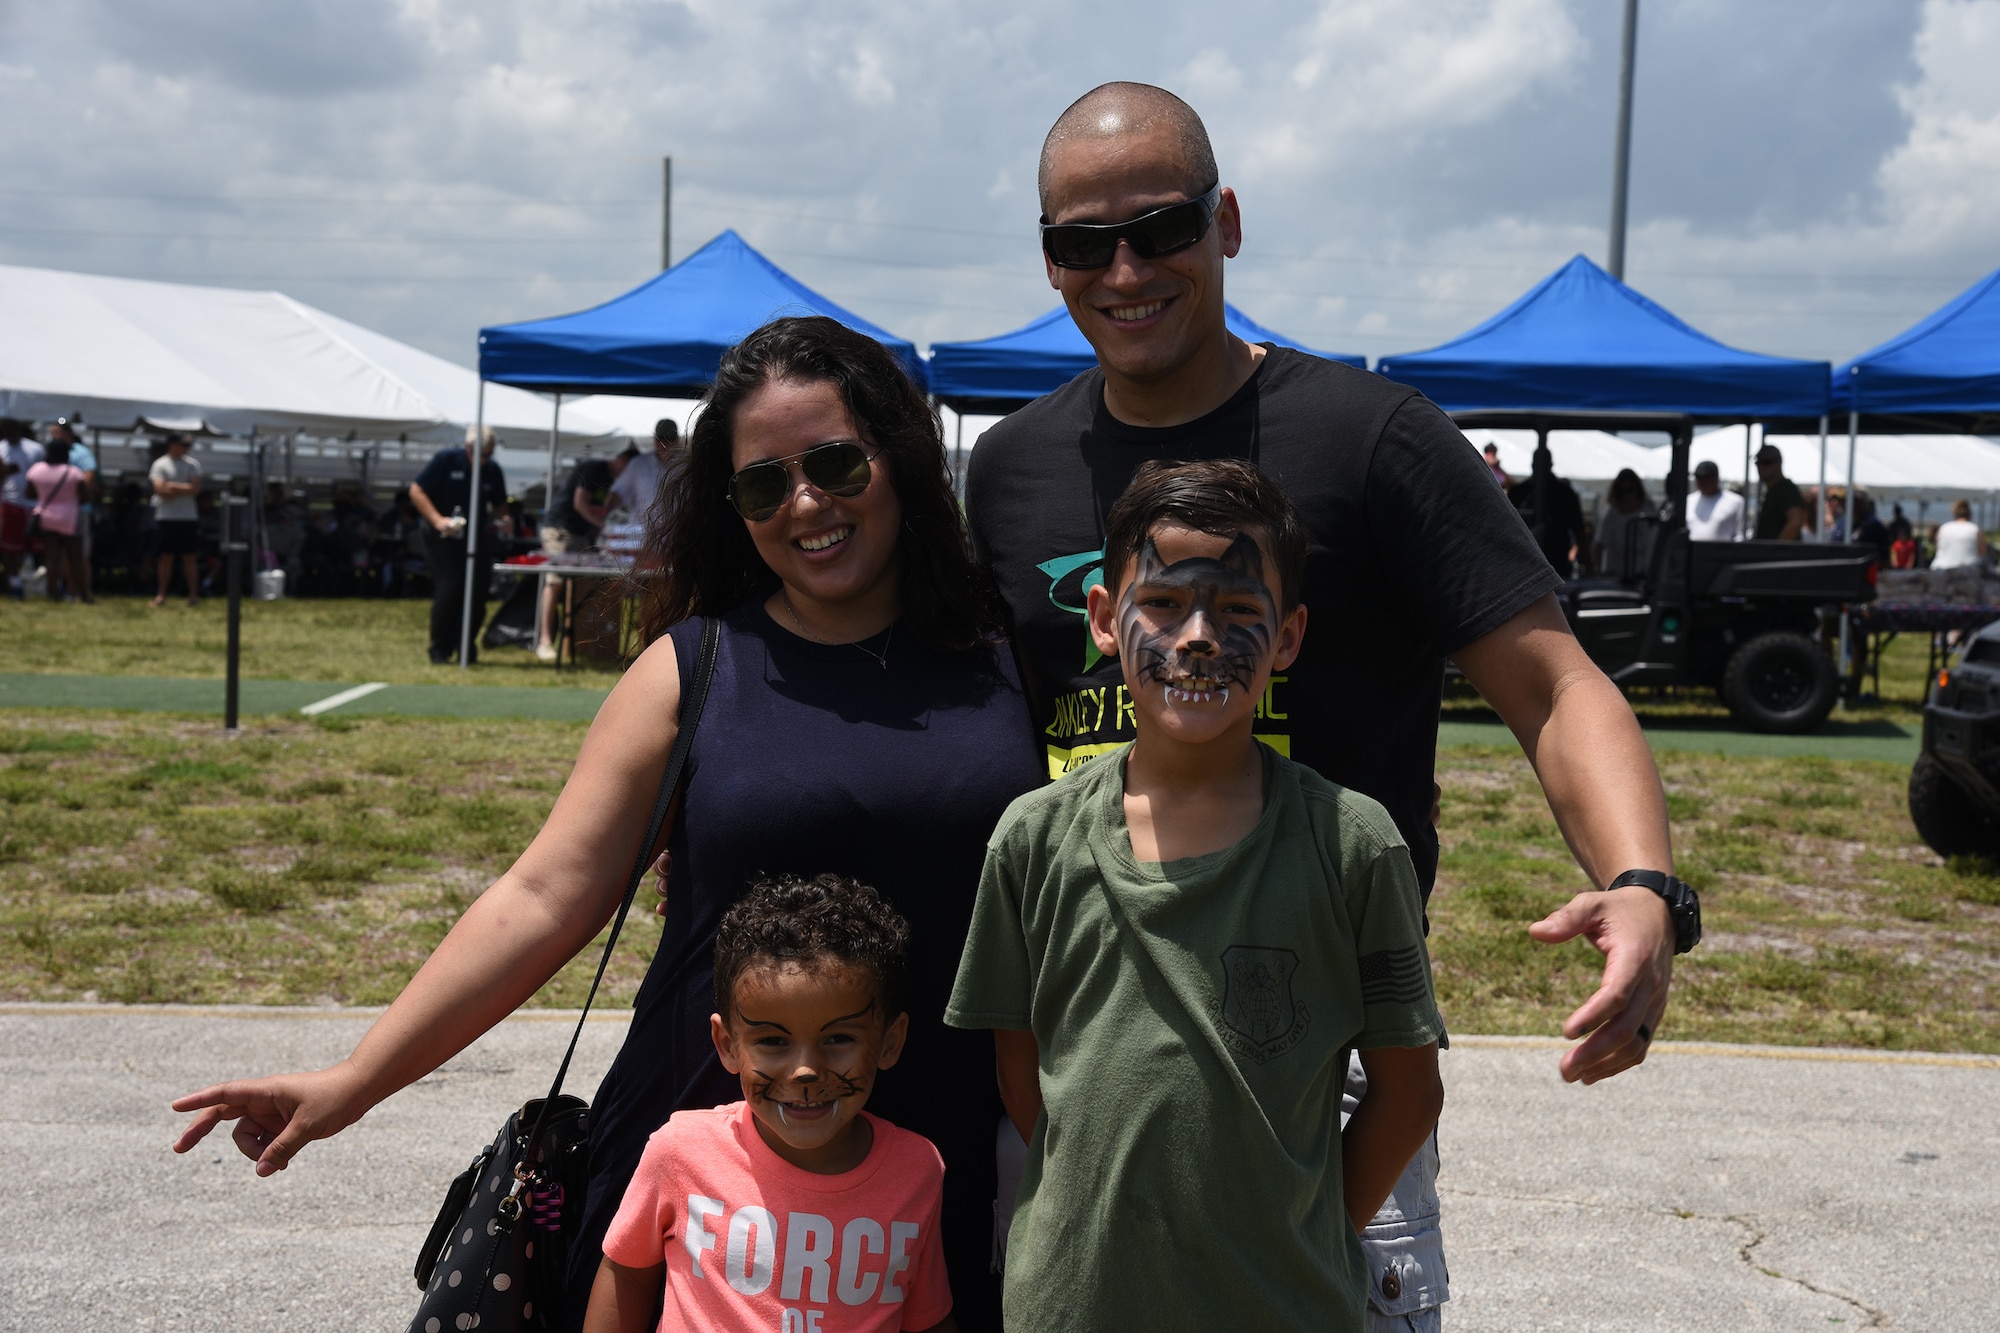 The 920th Rescue Wing held a biannual family day, at Patrick Air Force Base, Florida, Saturday, May 4, complete with food, games and live music. (U.S. Air Force photo)